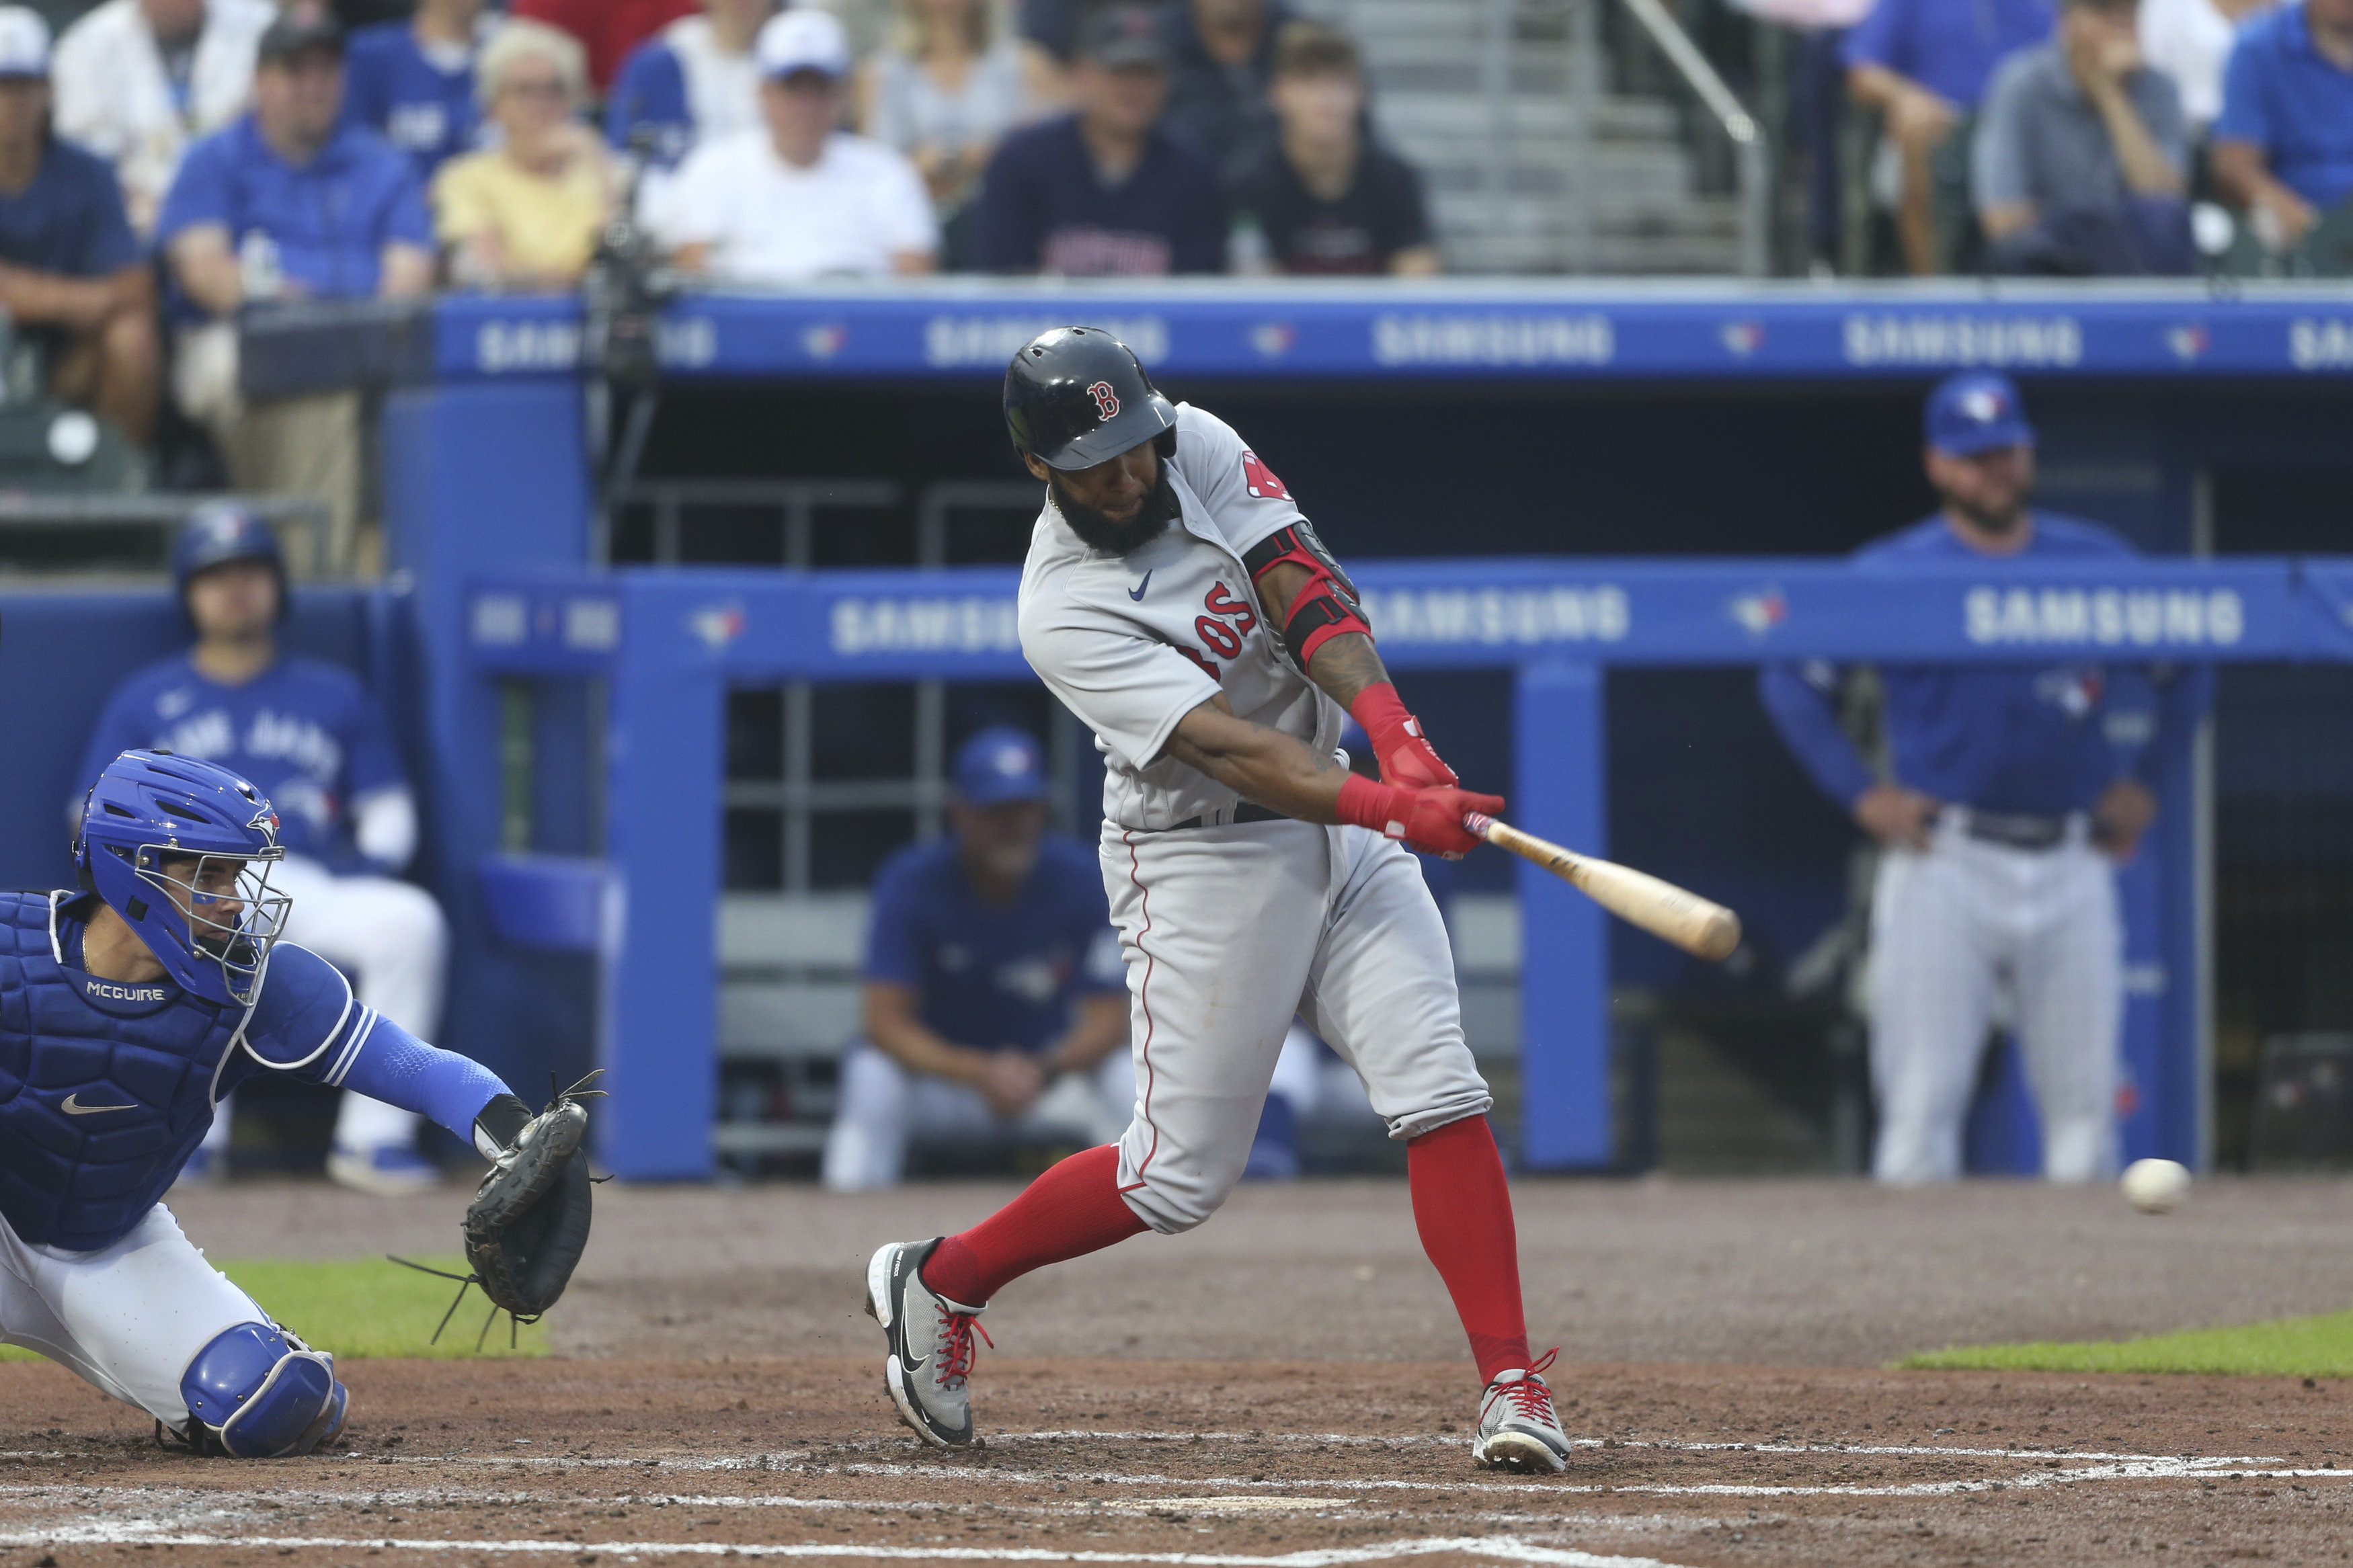 Renfroe's slam leads 6 HRs as Red Sox rout Blue Jays 13-4